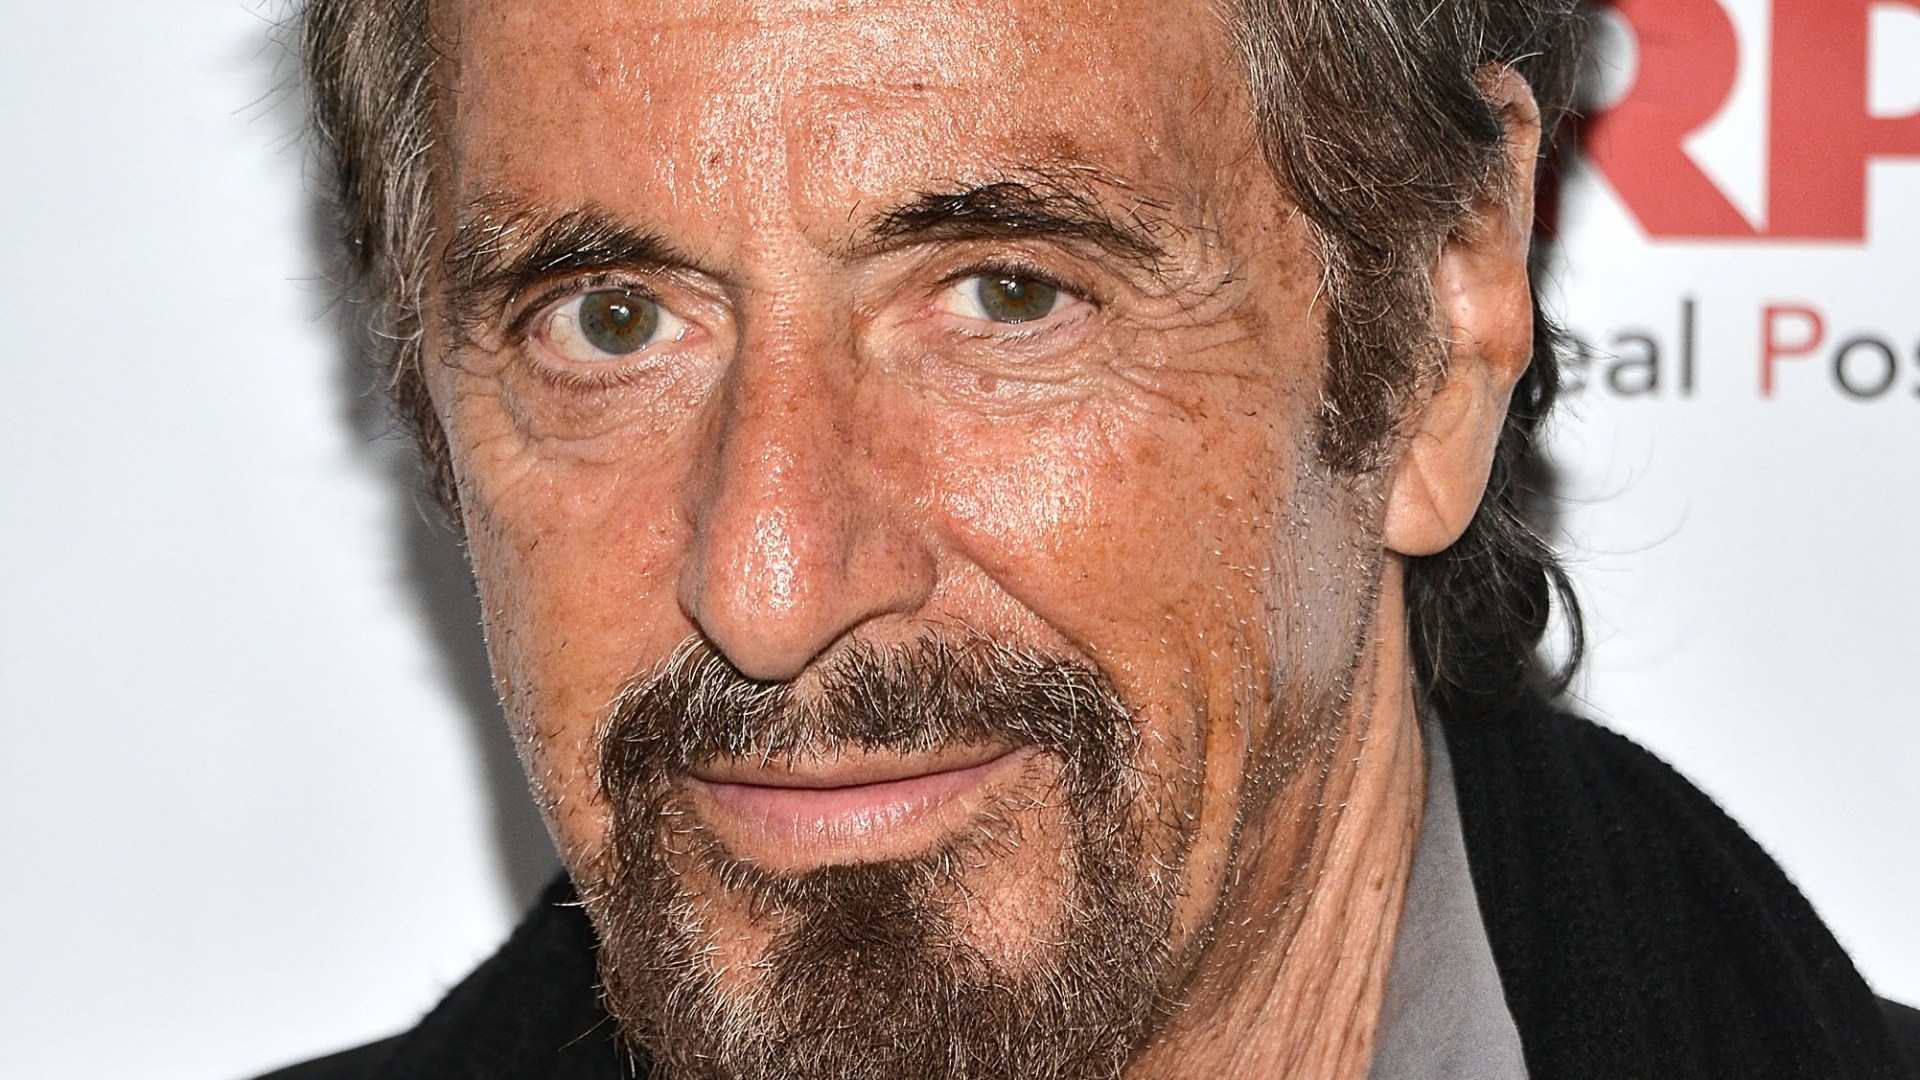 Al Pacino on His 75th Birthday 'Age is Just a Number